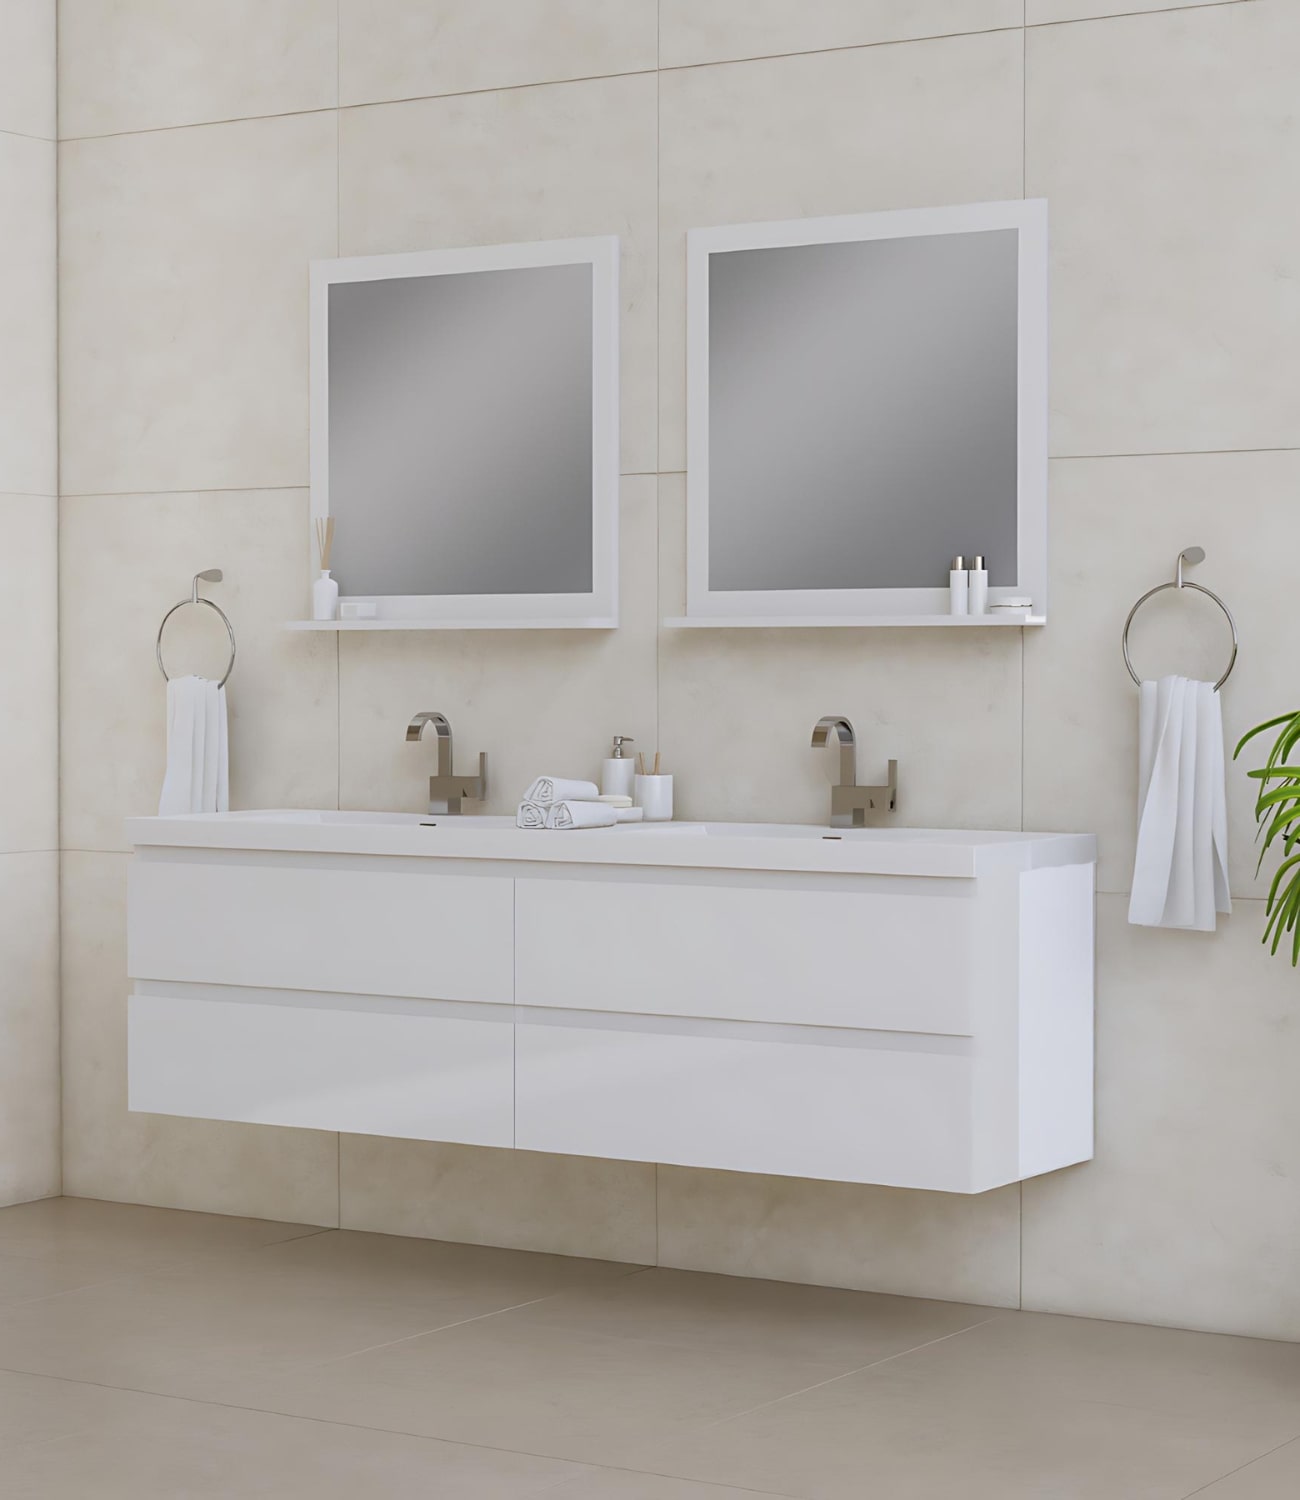 Easy to install, wall hung bathroom vanities ready for any size bathroom!